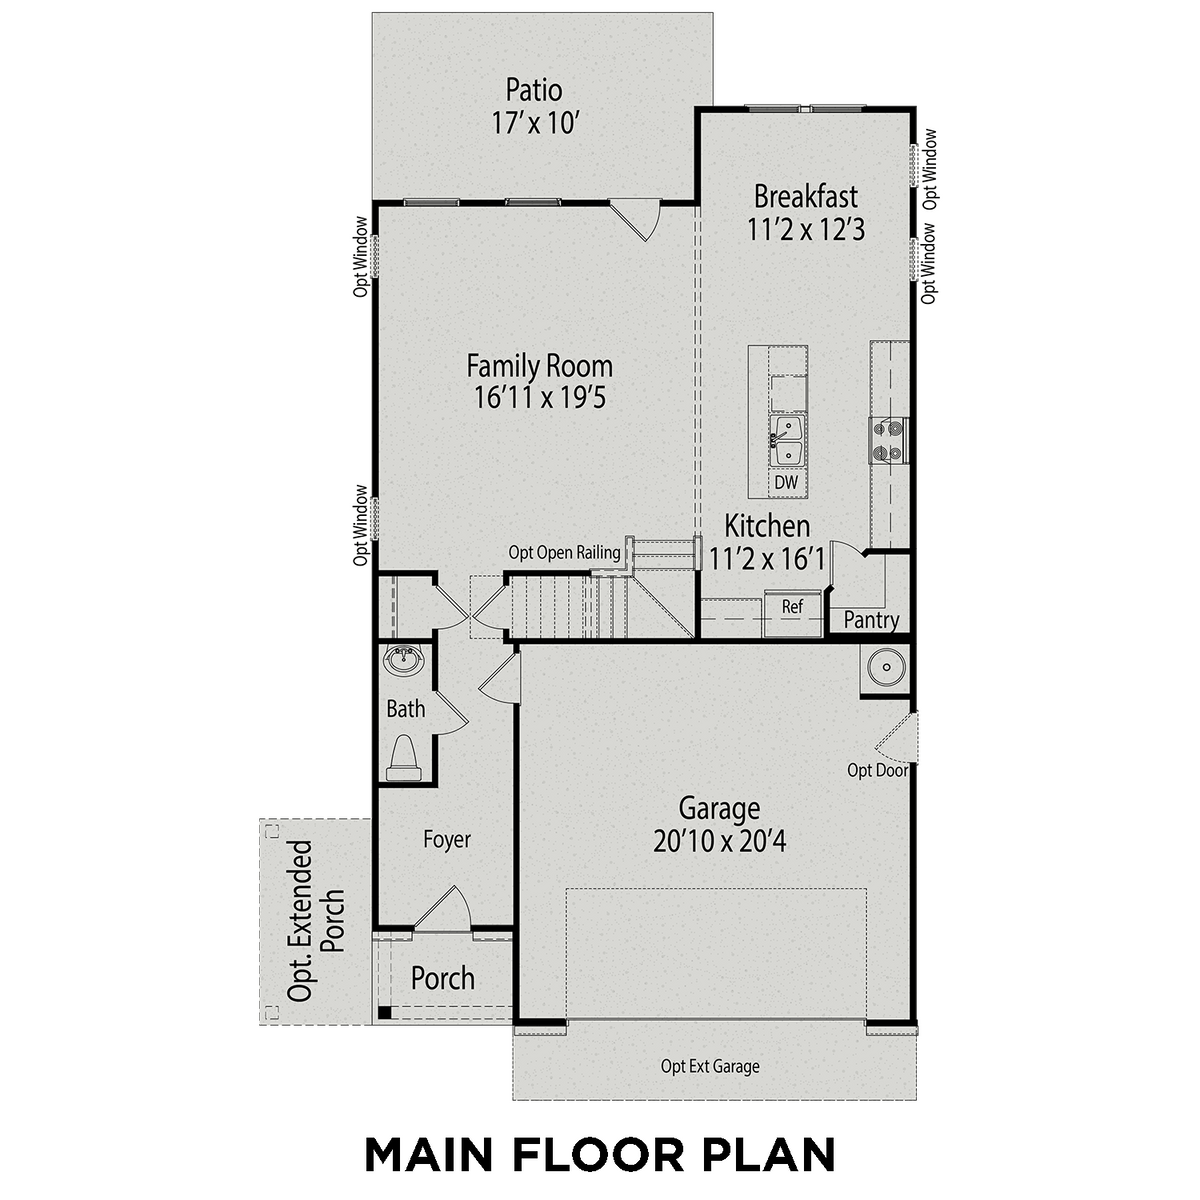 1 - The Grace A floor plan layout for 60 Grassy Ridge Court in Davidson Homes' Beverly Place community.